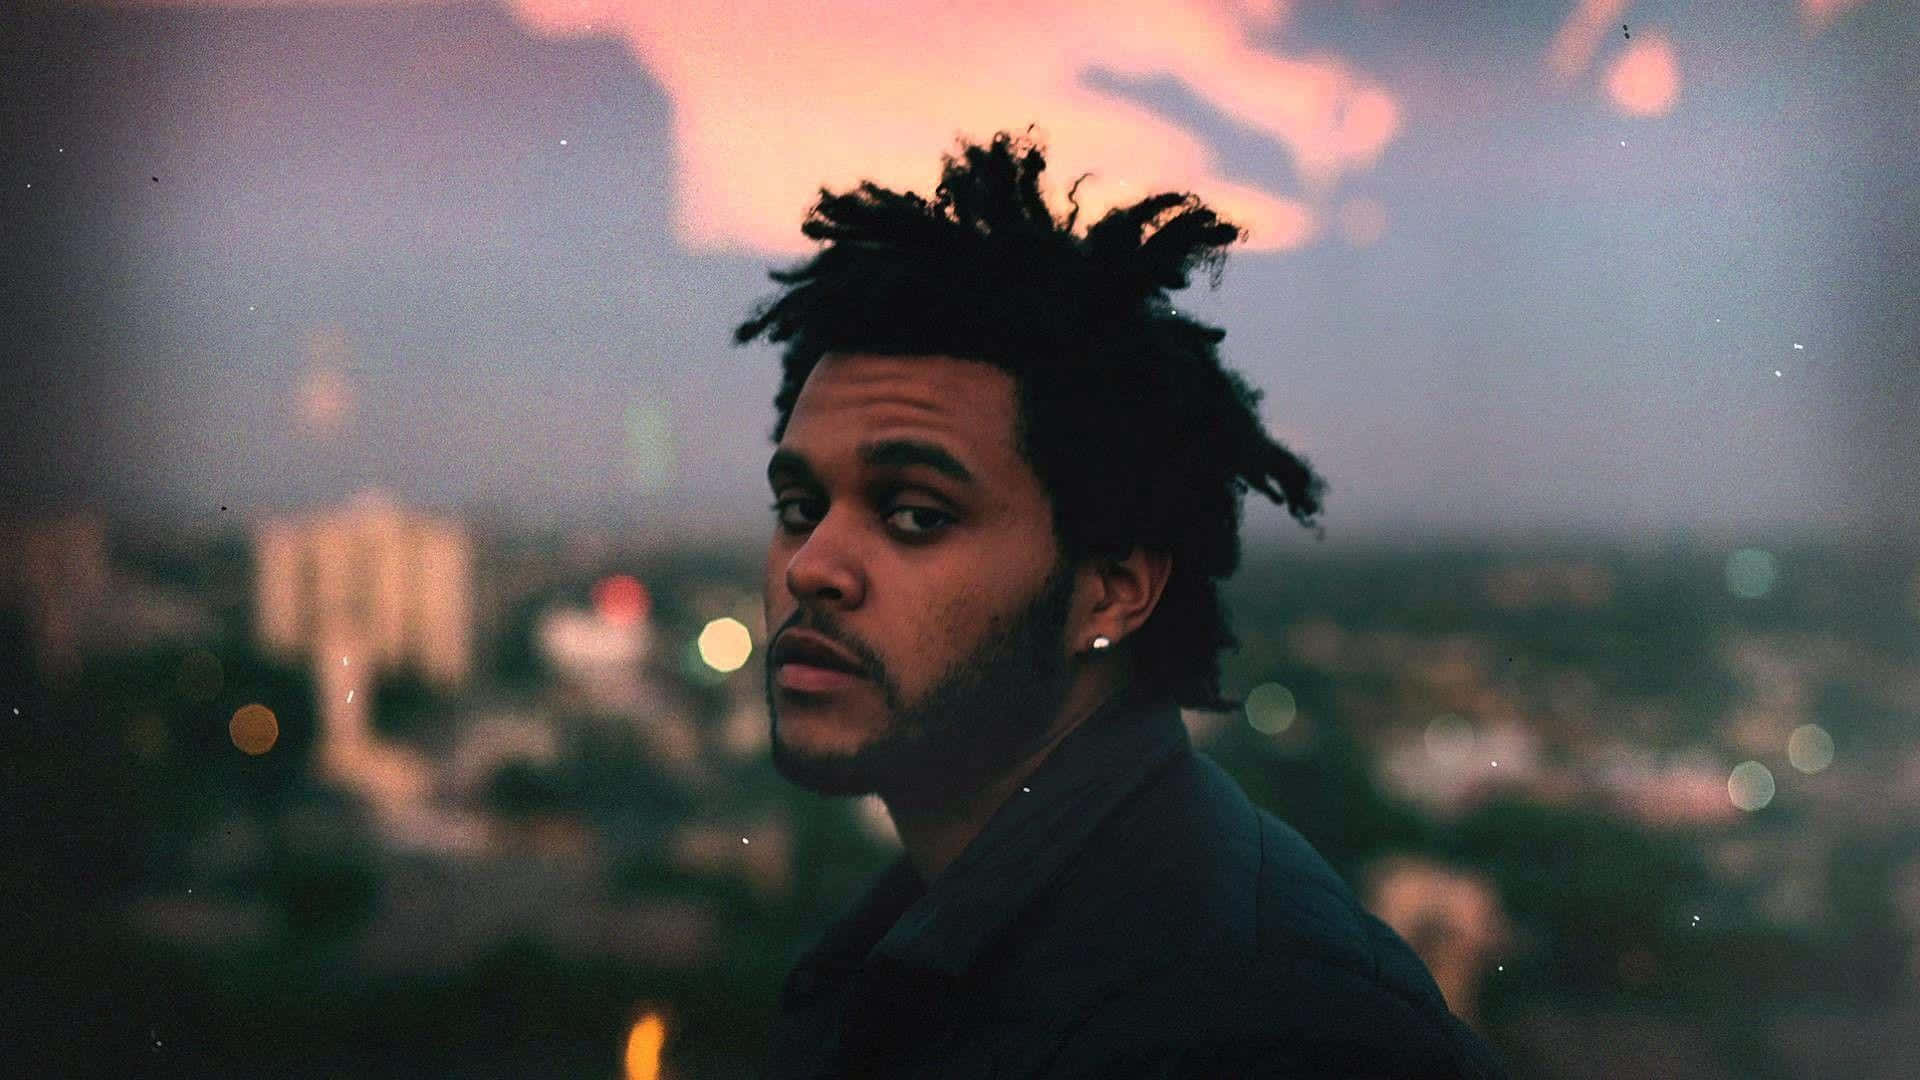 The Weeknd in the 'After Hours' Era Wallpaper